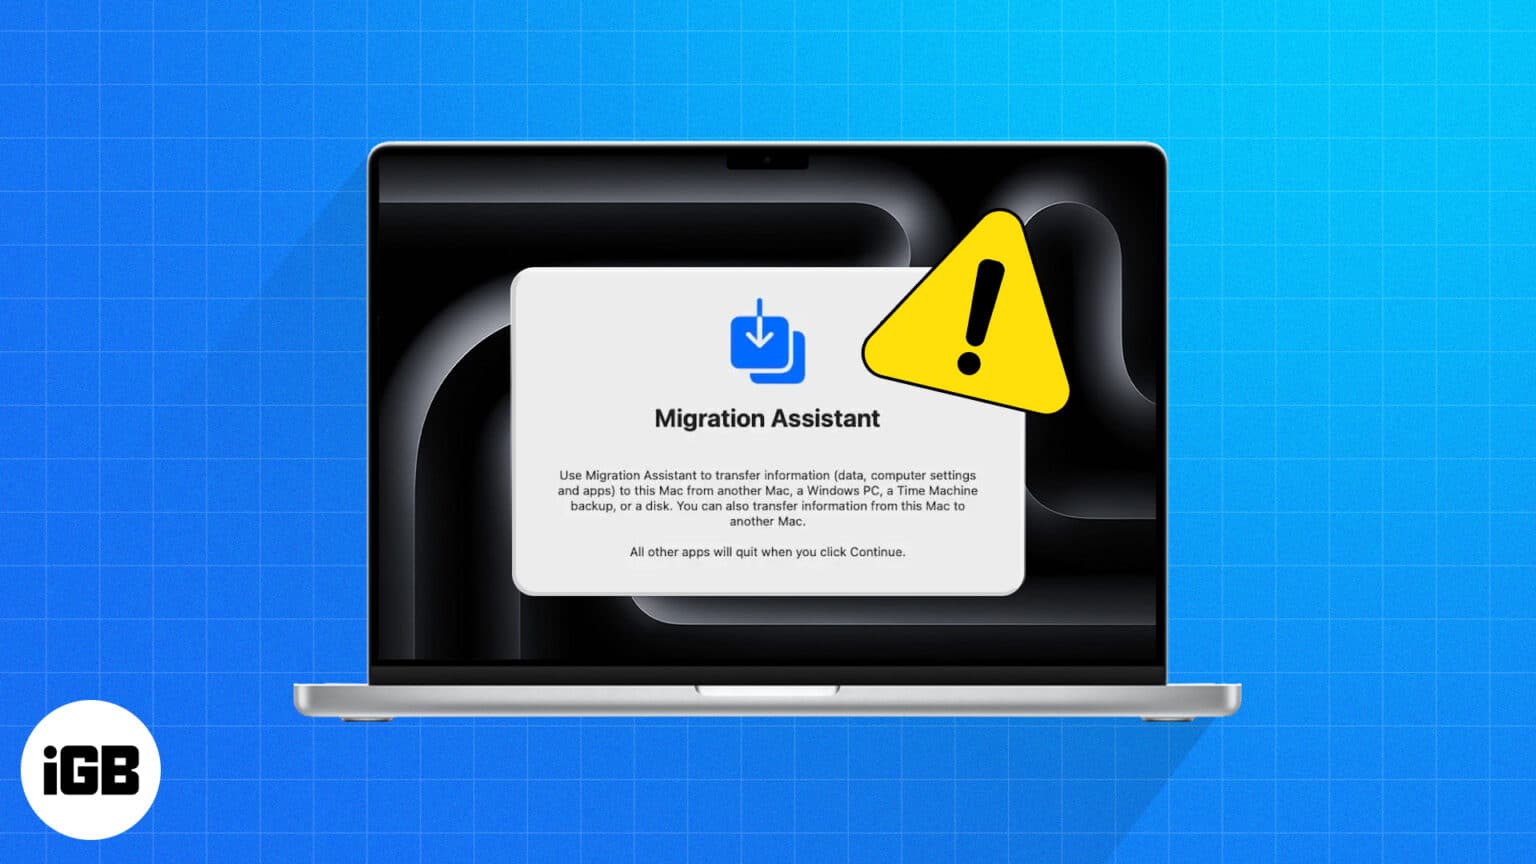 Migration Assistant not working on Mac